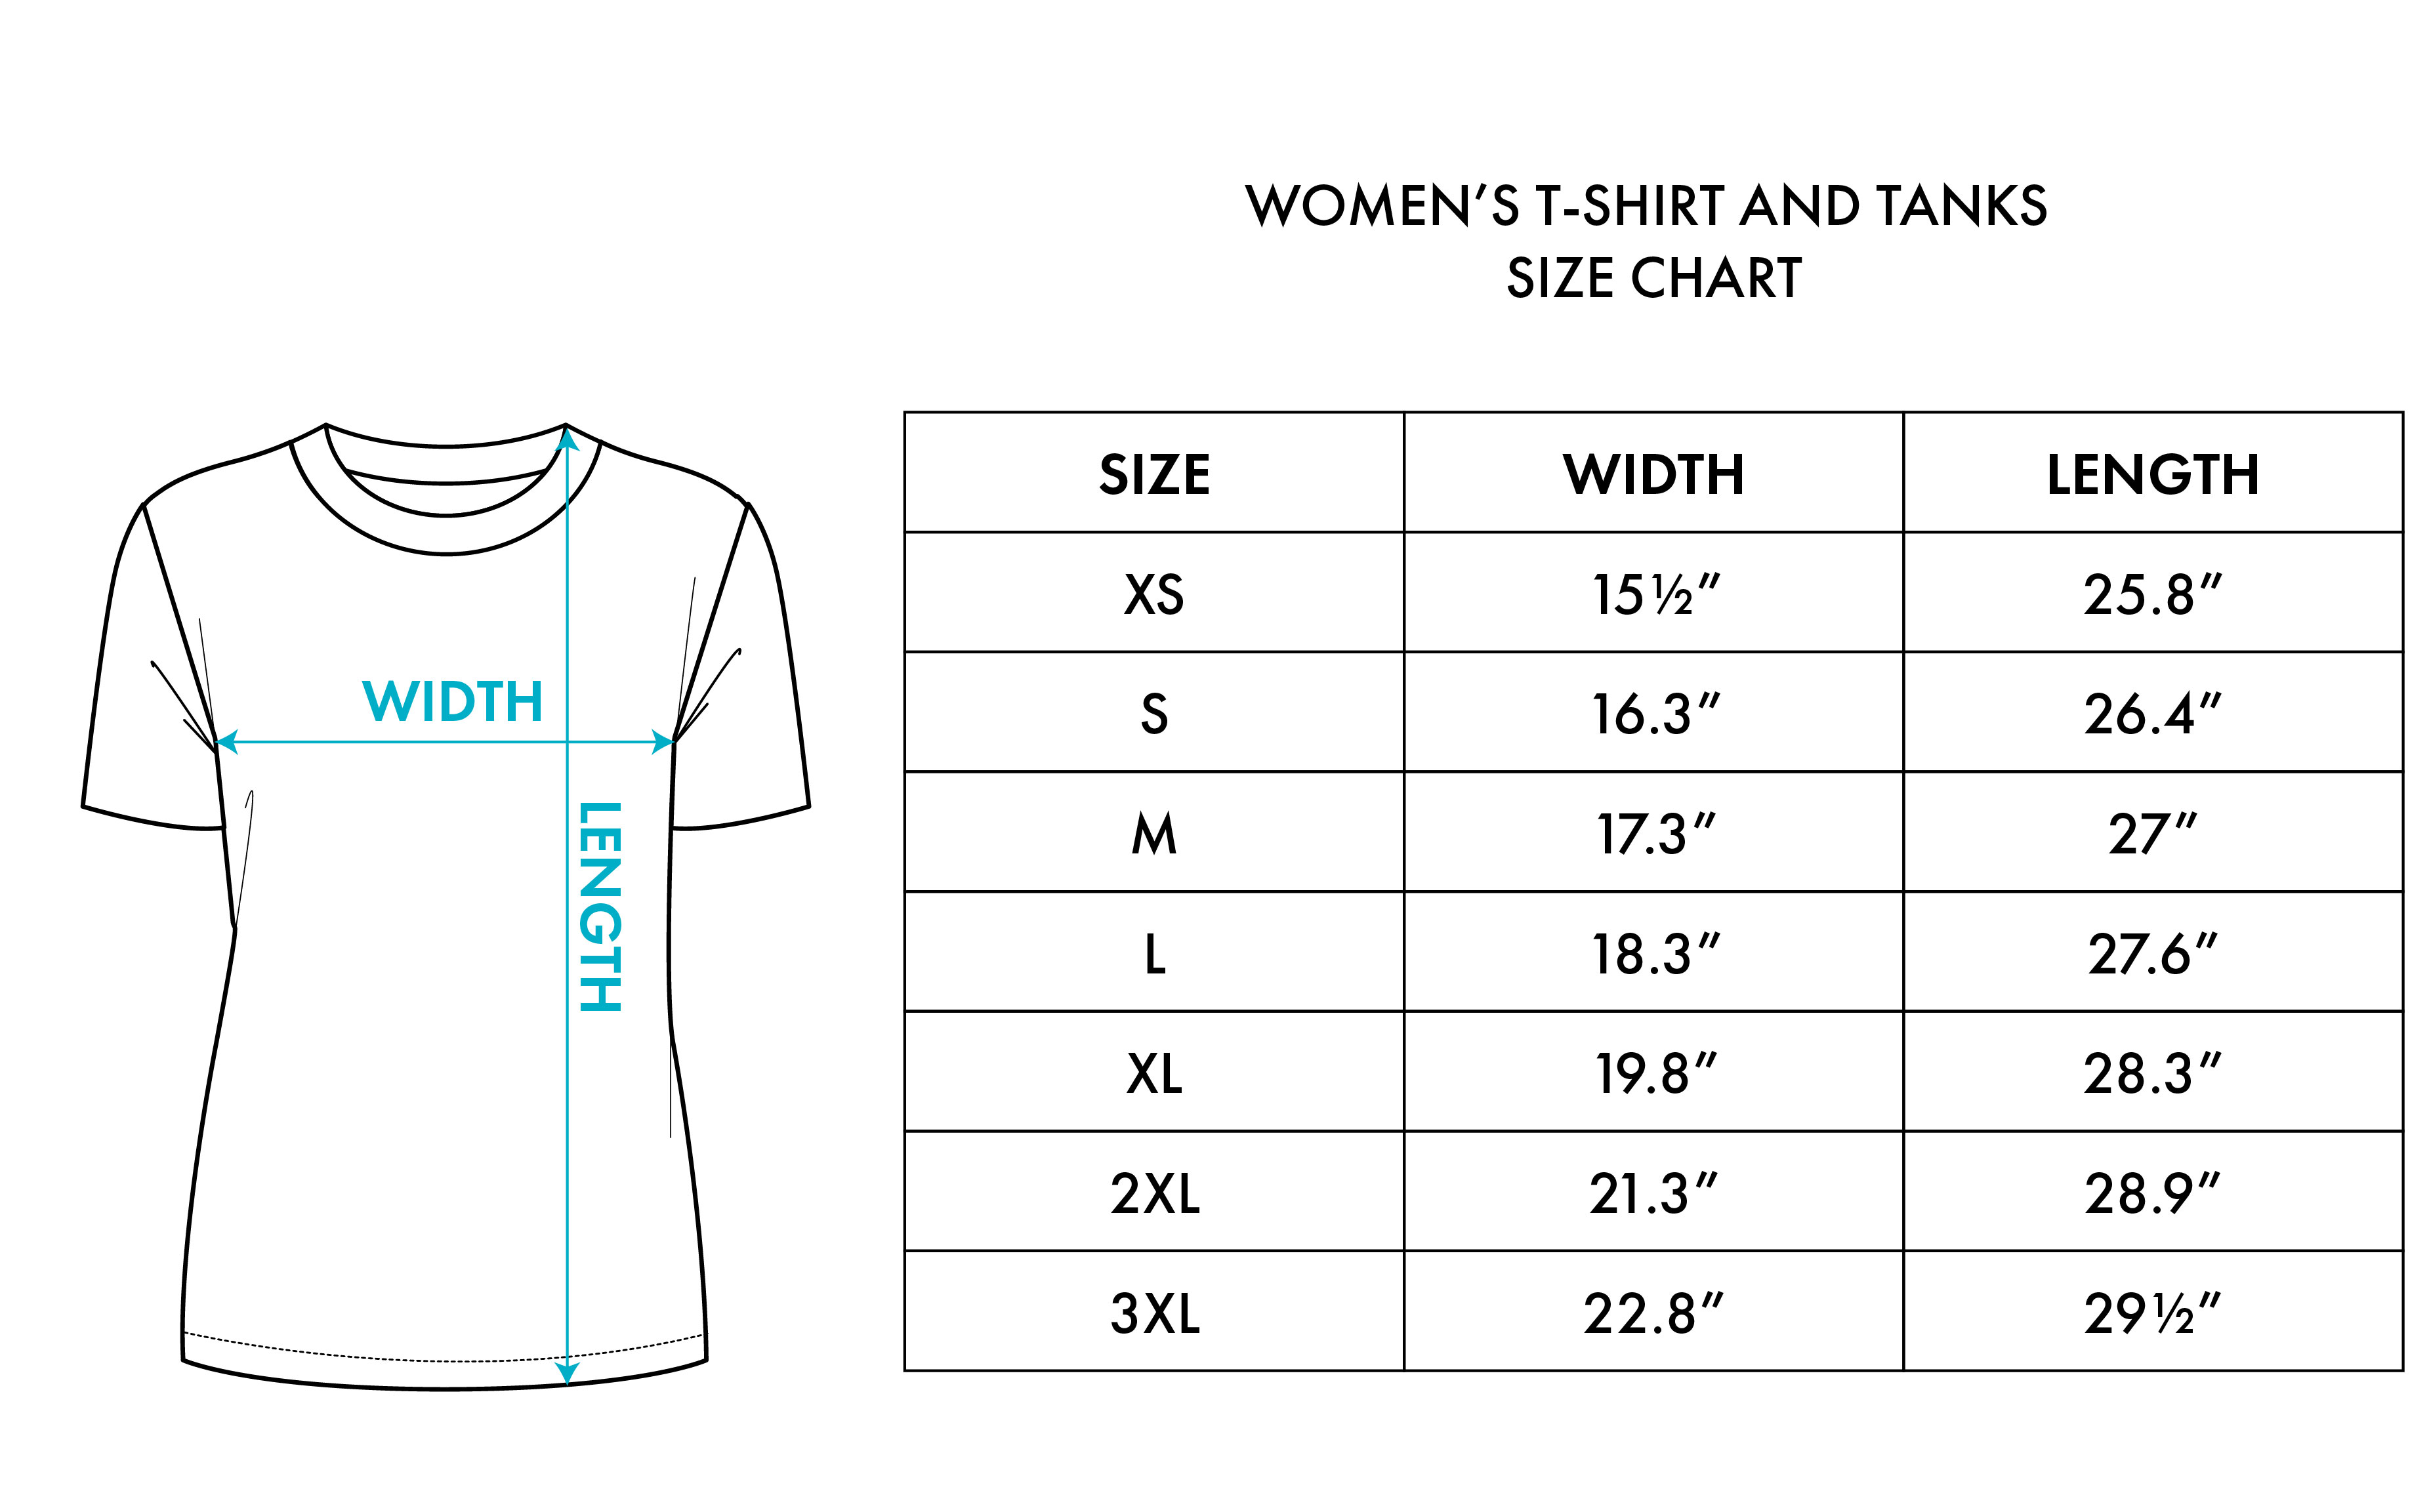 SCARPA Women's Top Sizing Chart Mobile